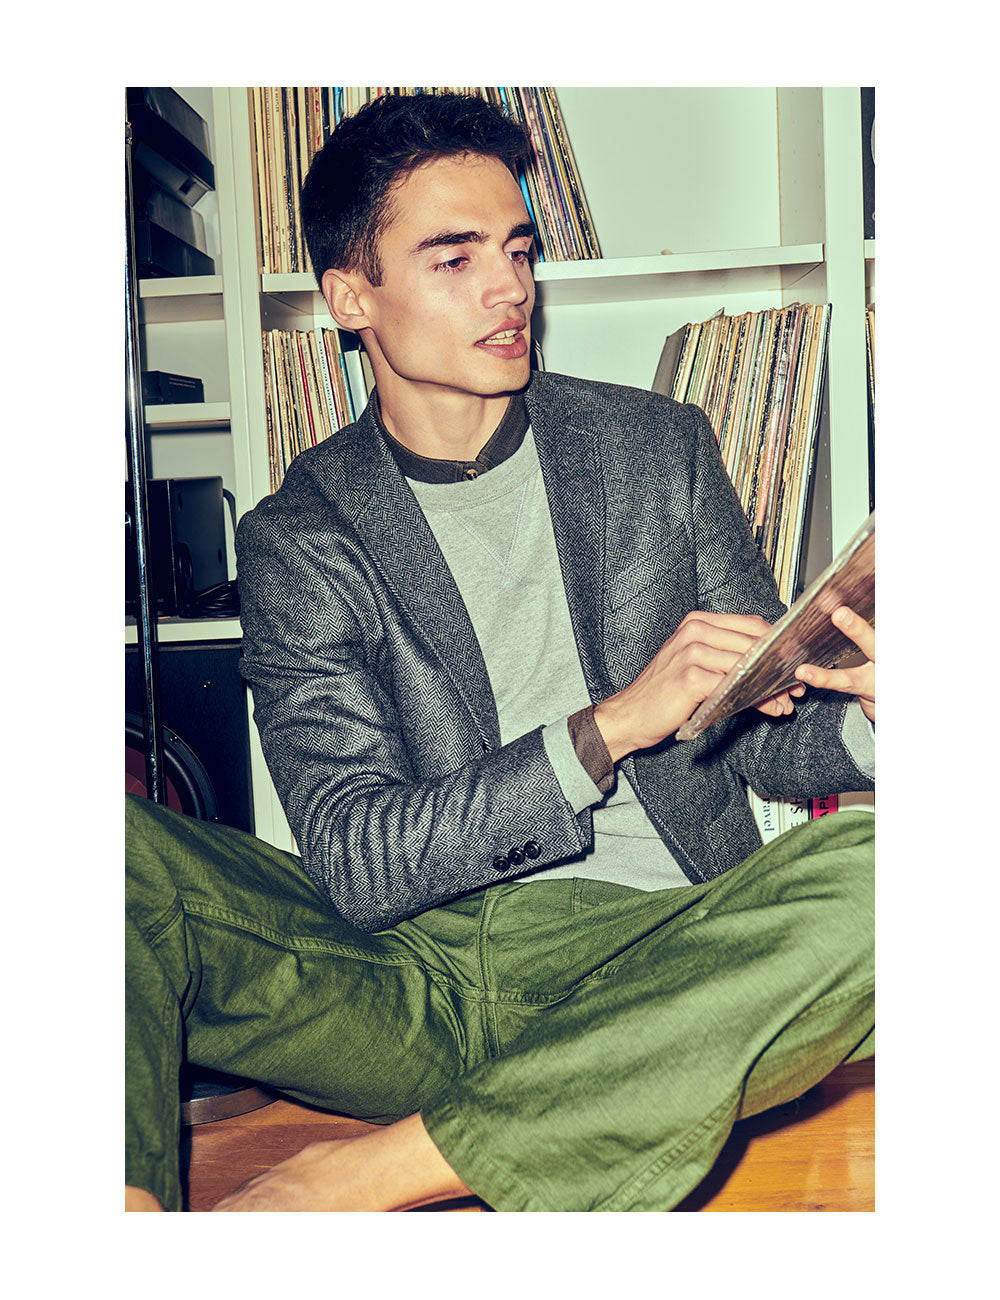 Model wearing a black button-down shirt, gray sweatshirt, charcoal herringbone unstructured blazer, and green chinos. He is sitting cross legged on the floor looking at records.